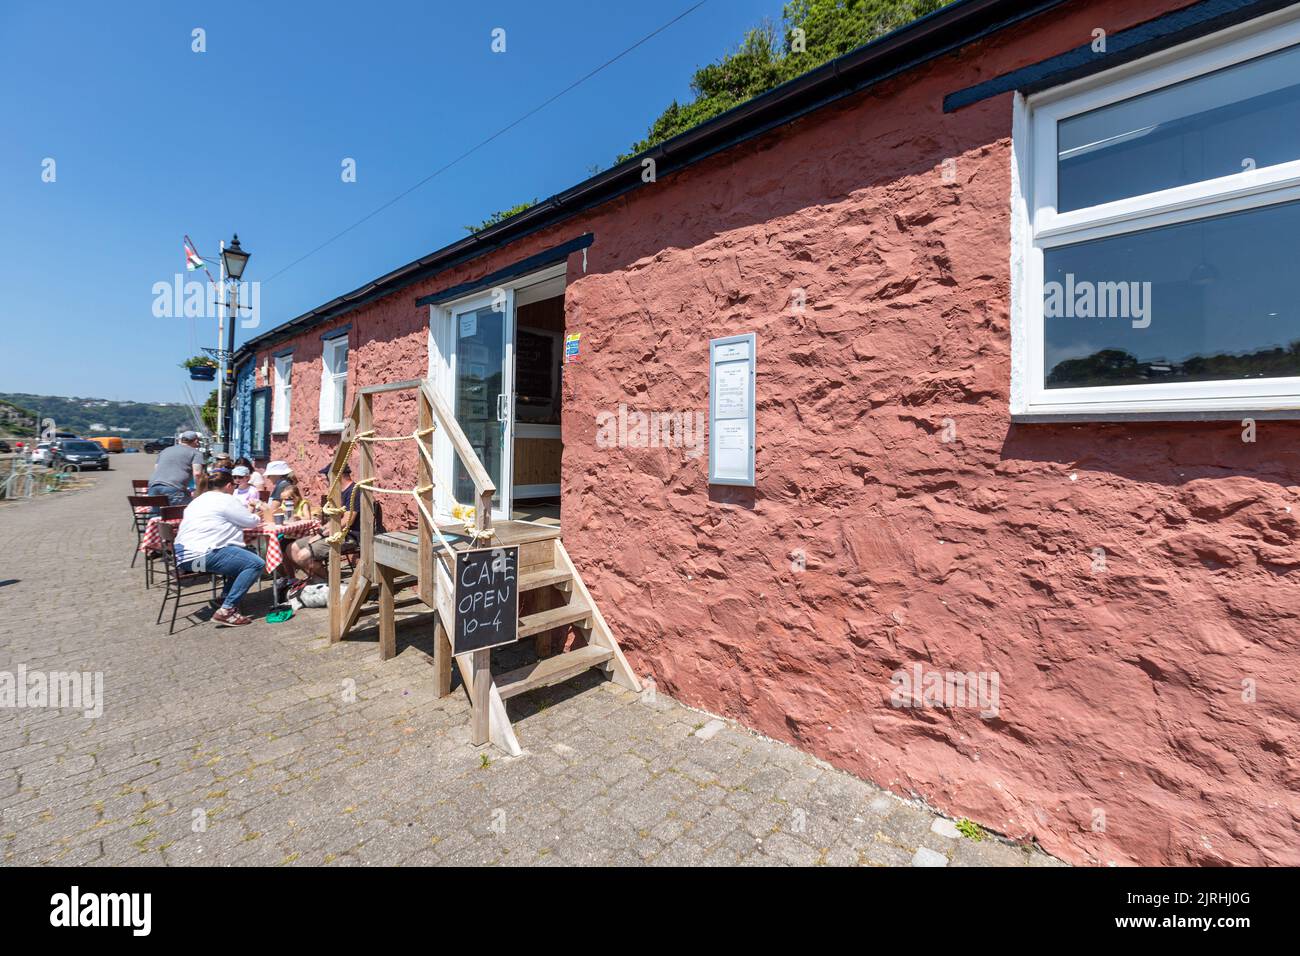 People eating outside the Cafe on the Quay, Village of Fishguard, Pembrokeshire, Wales, UK Stock Photo